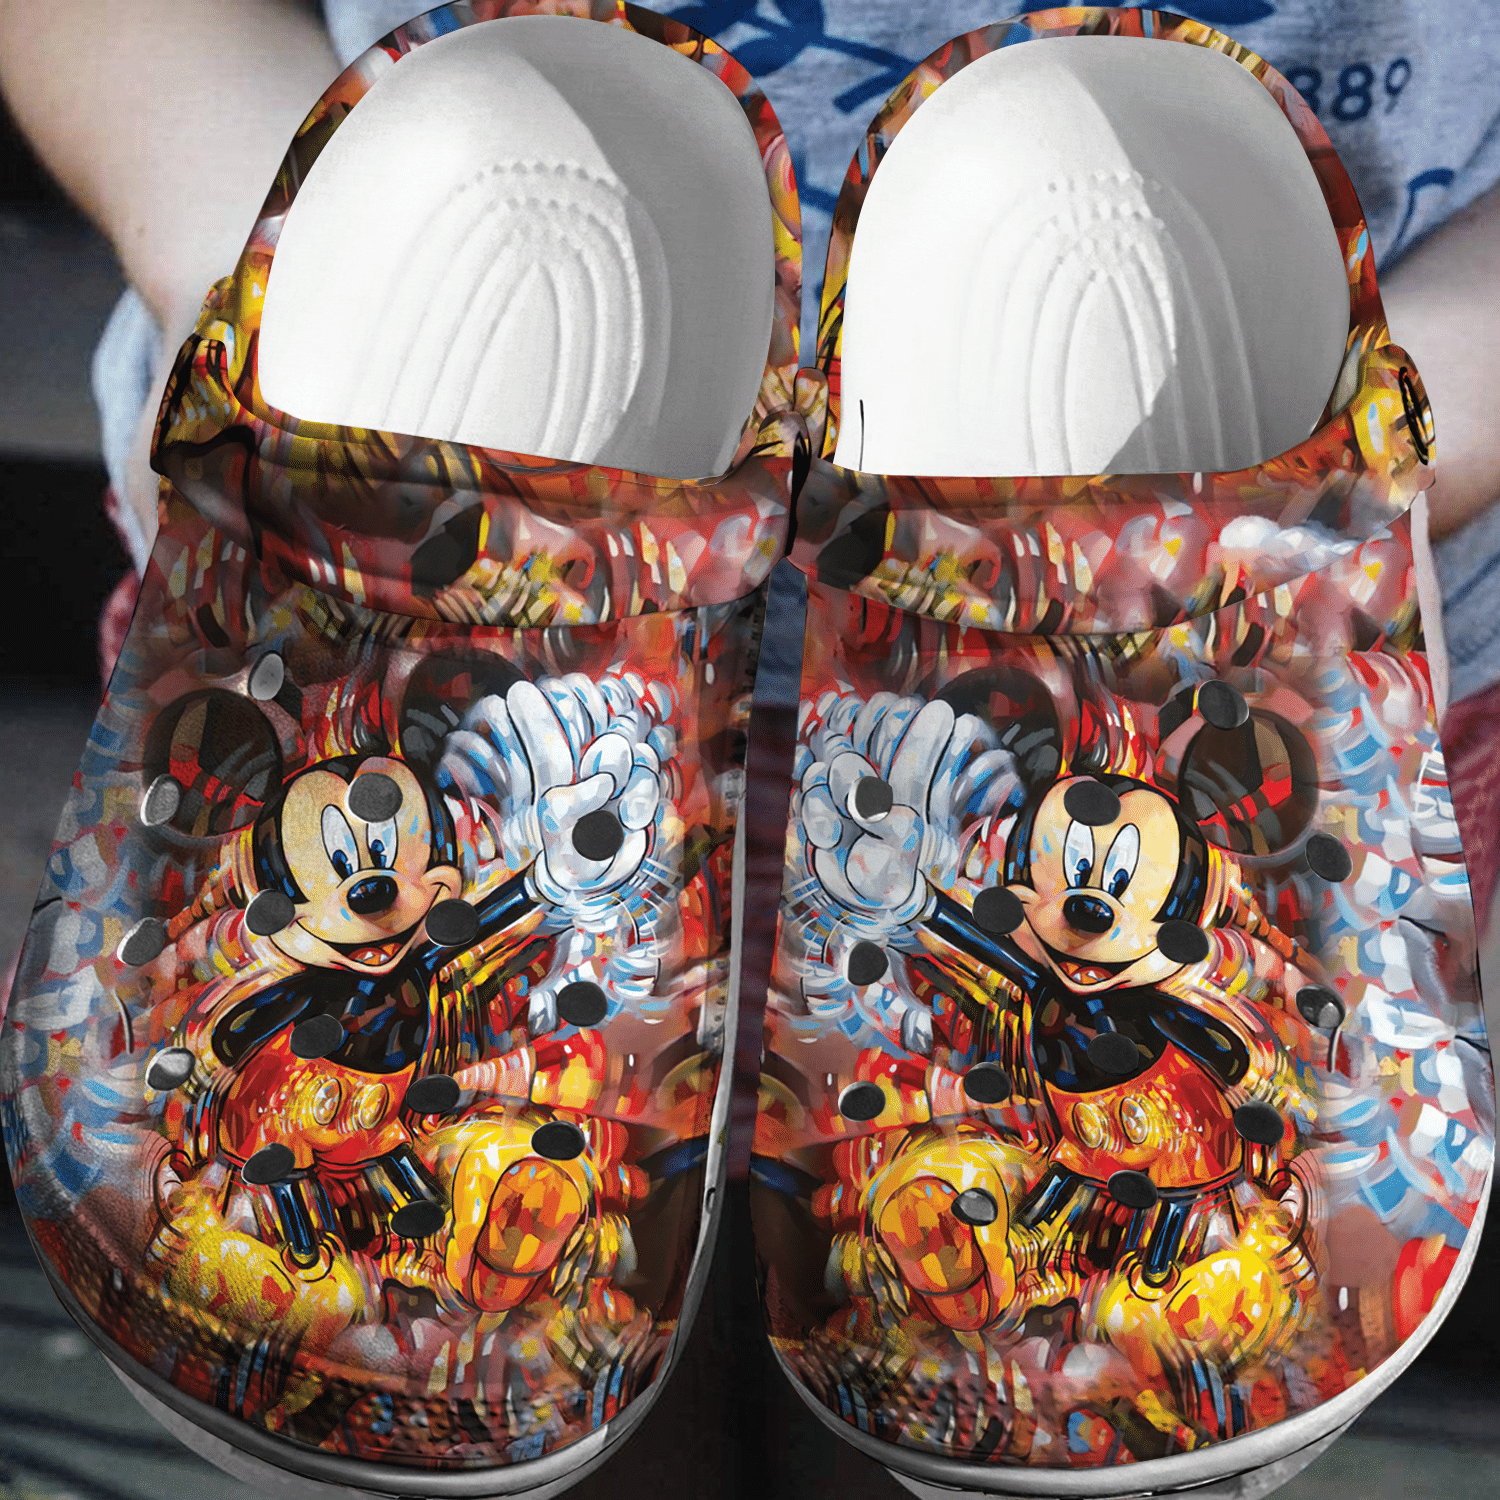 Disney Style: Mickey Mouse Crocs Classic Clogs